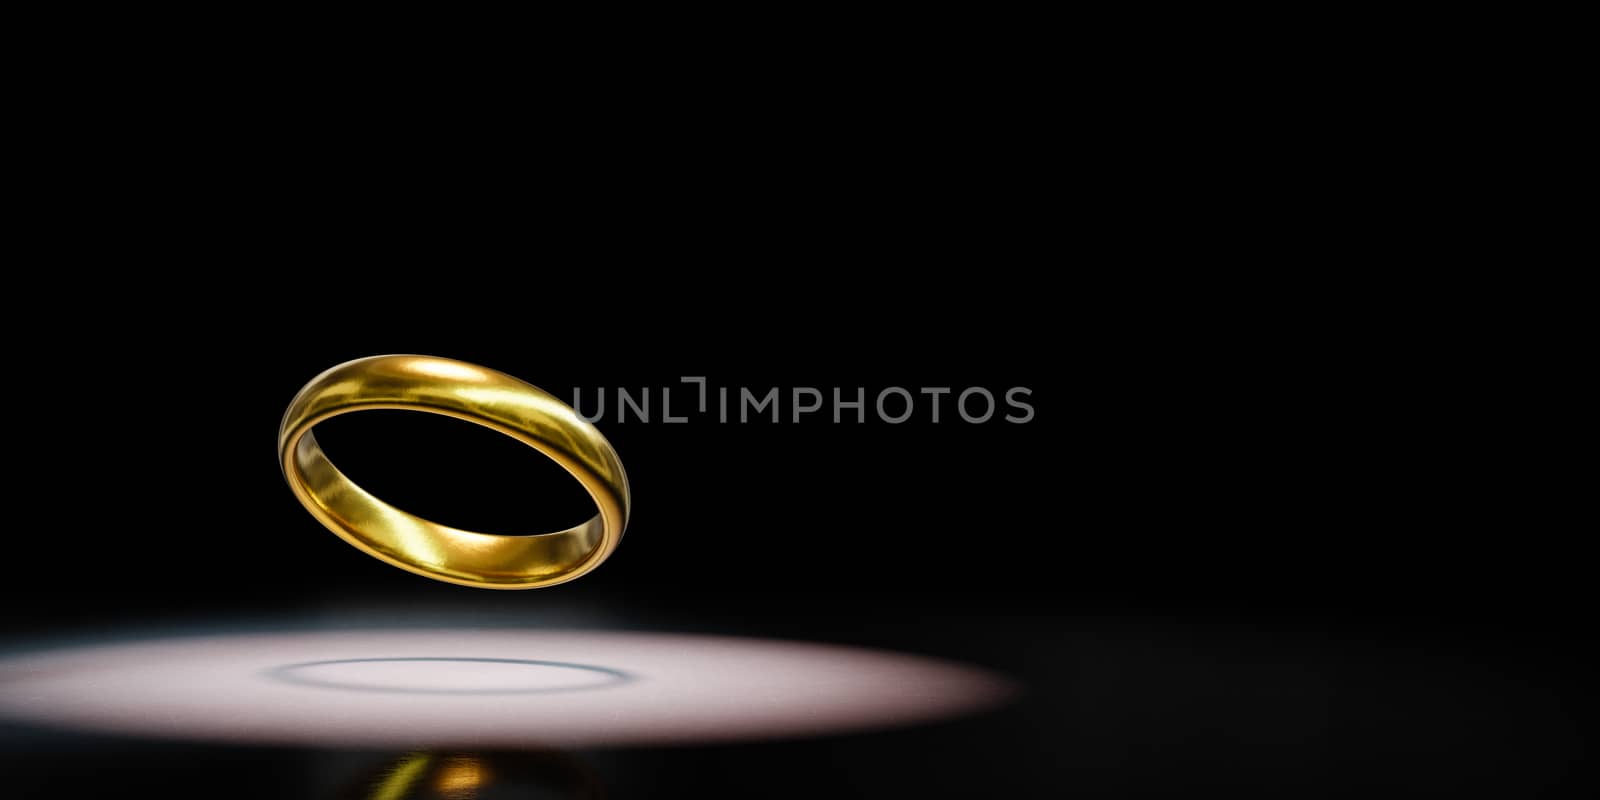 One Single Golden Ring Spotlighted on Black Background with Copy Space 3D Illustration